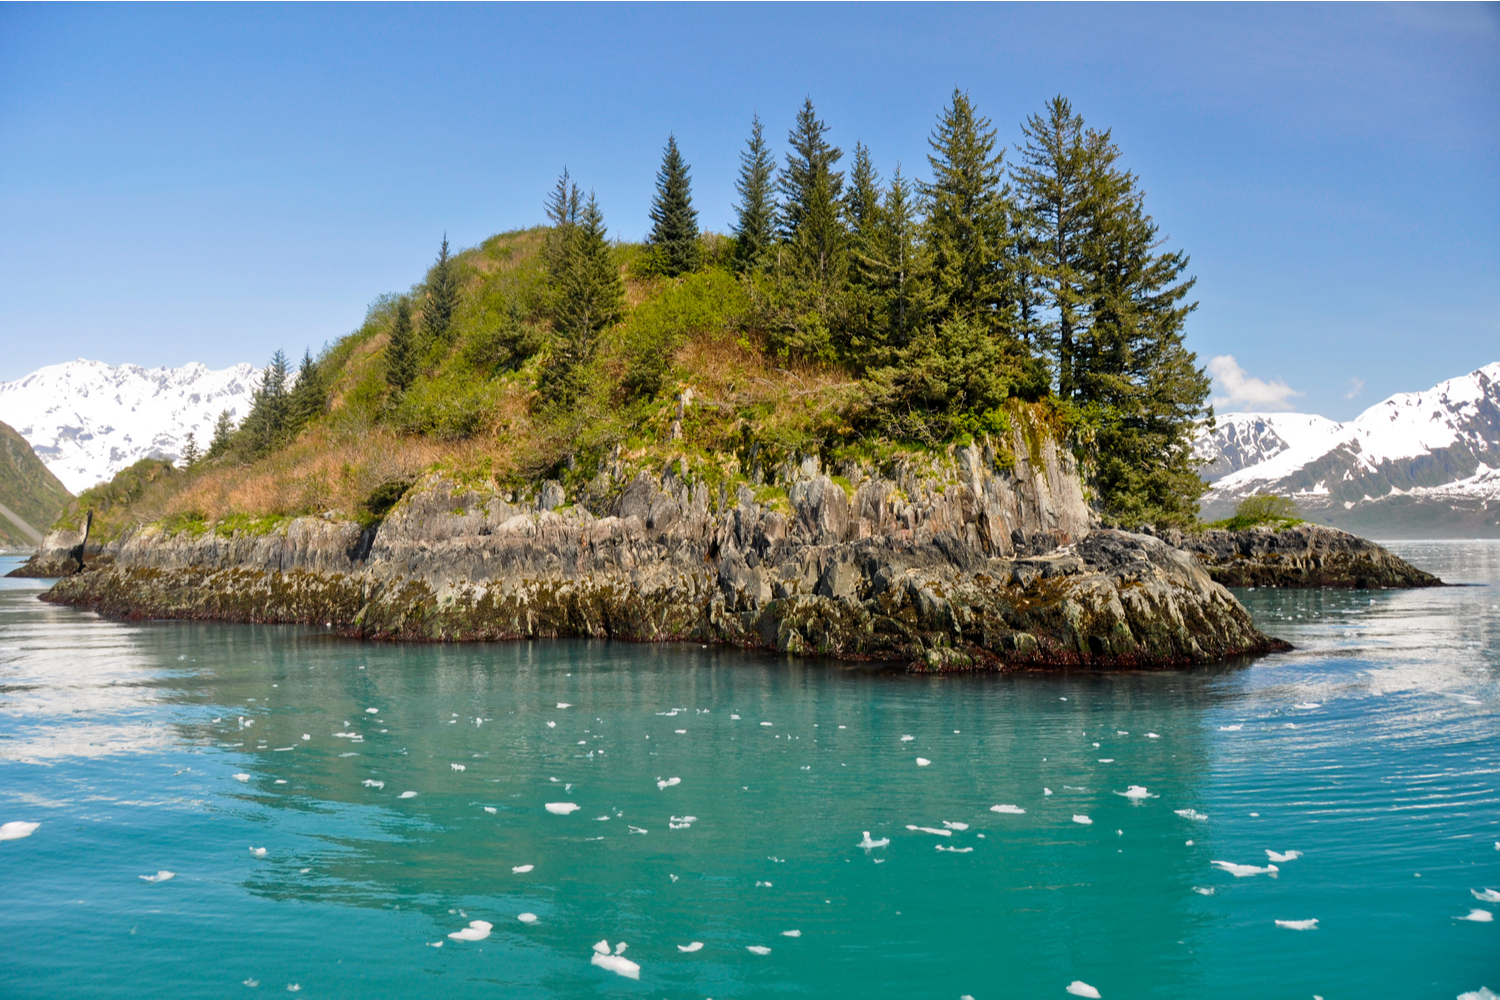 A stunning view of one of the many islands of the shores of the Kenai Peninsula.